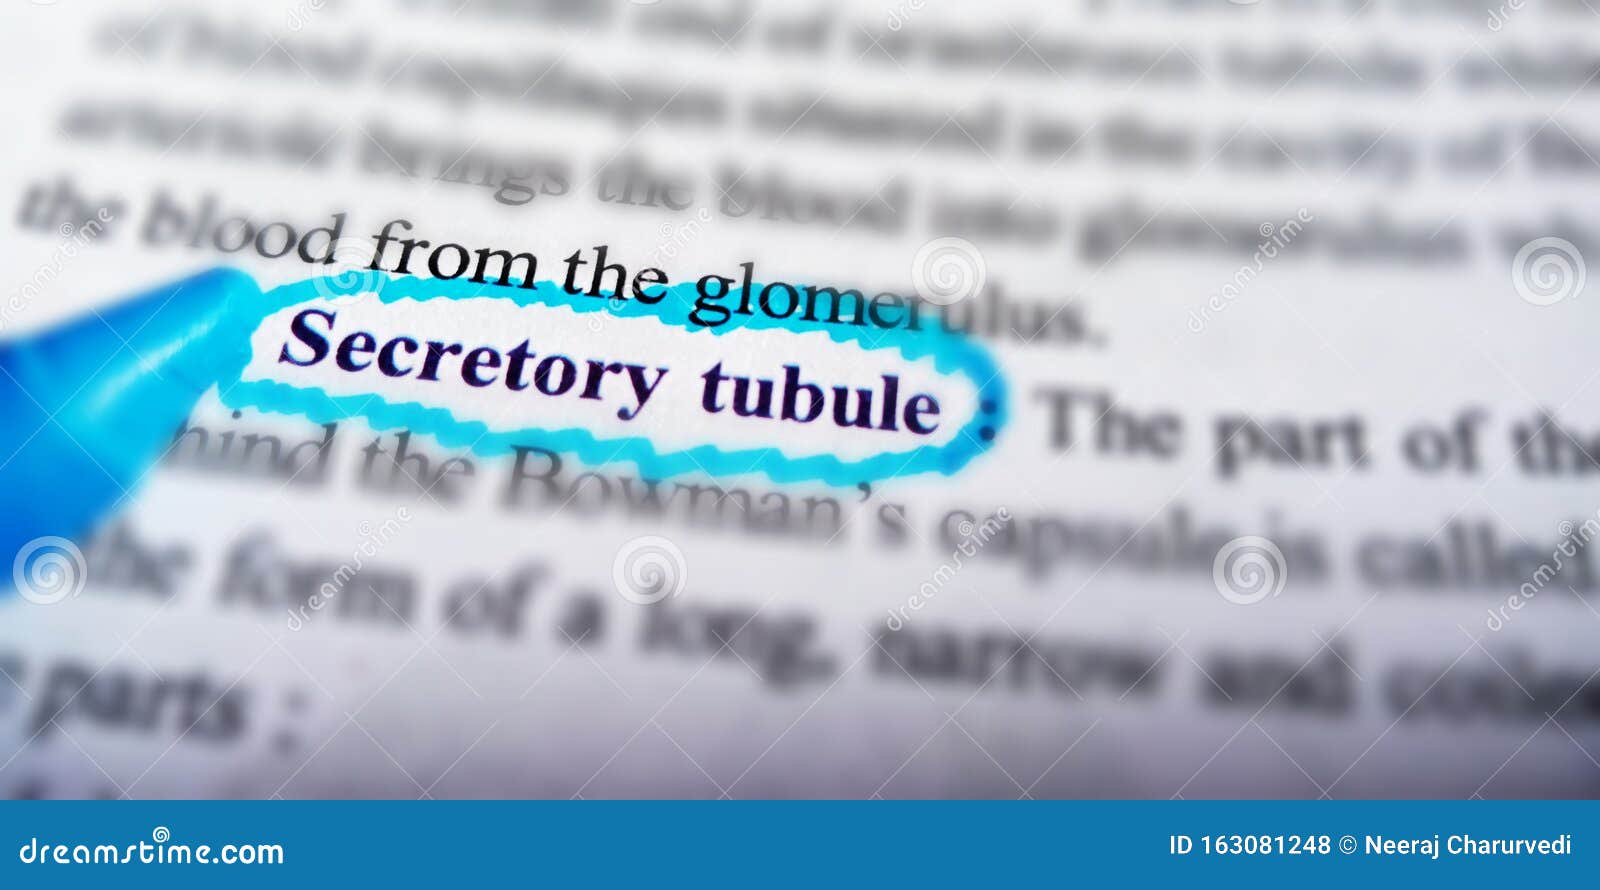 secretory tubule biological word displayed on blue colour covering text form on white paper sheet